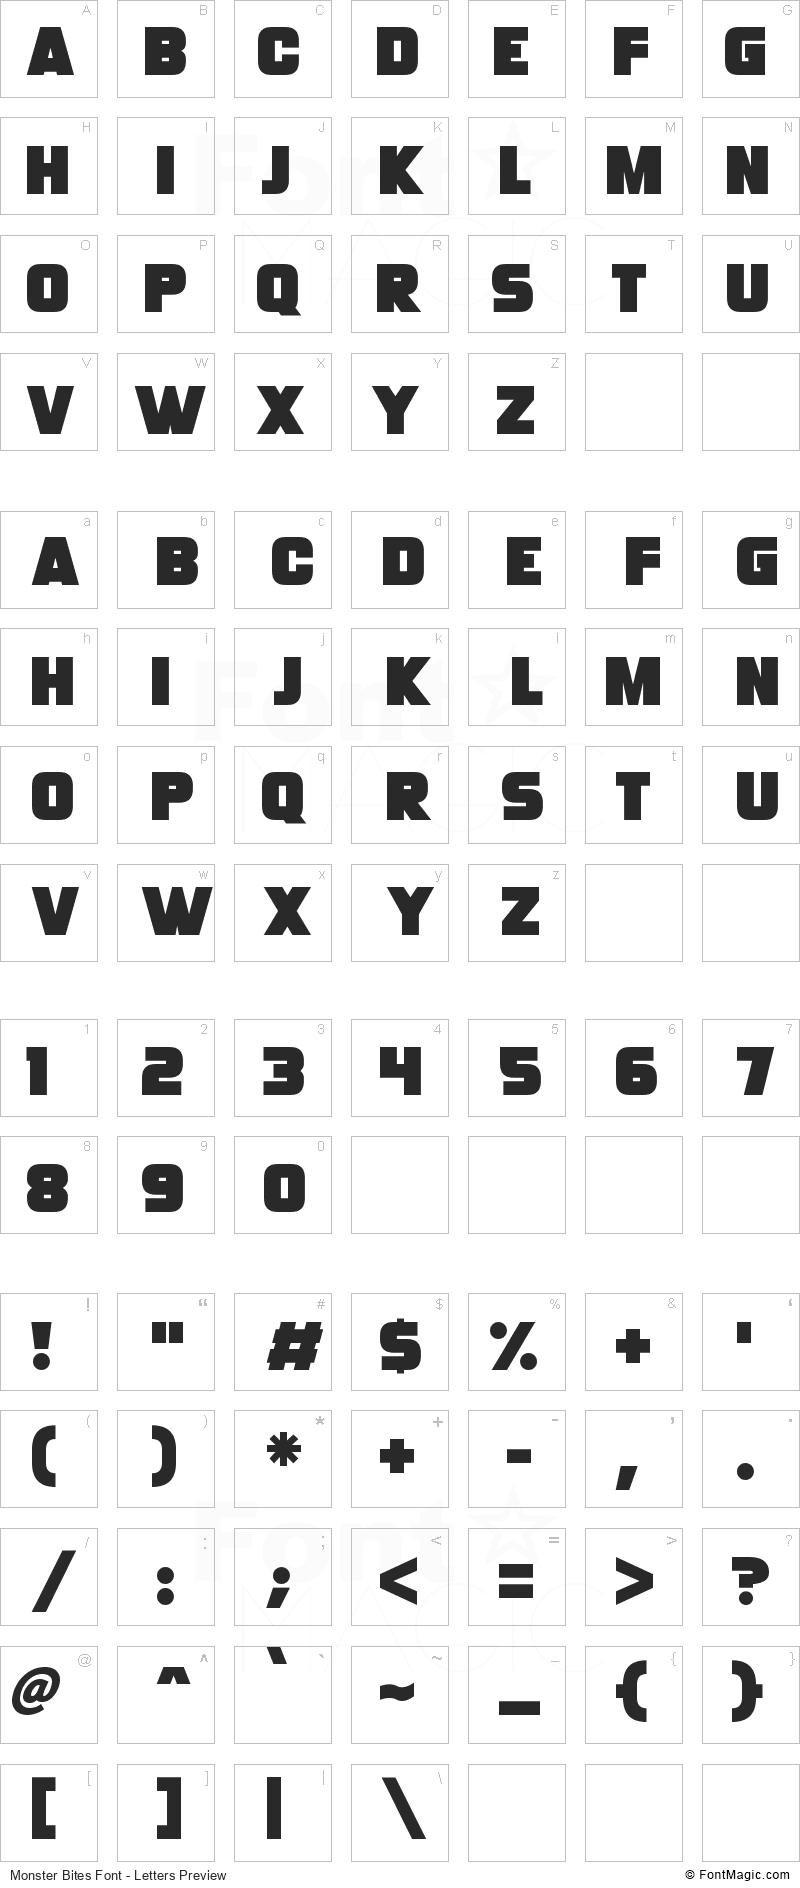 Monster Bites Font - All Latters Preview Chart